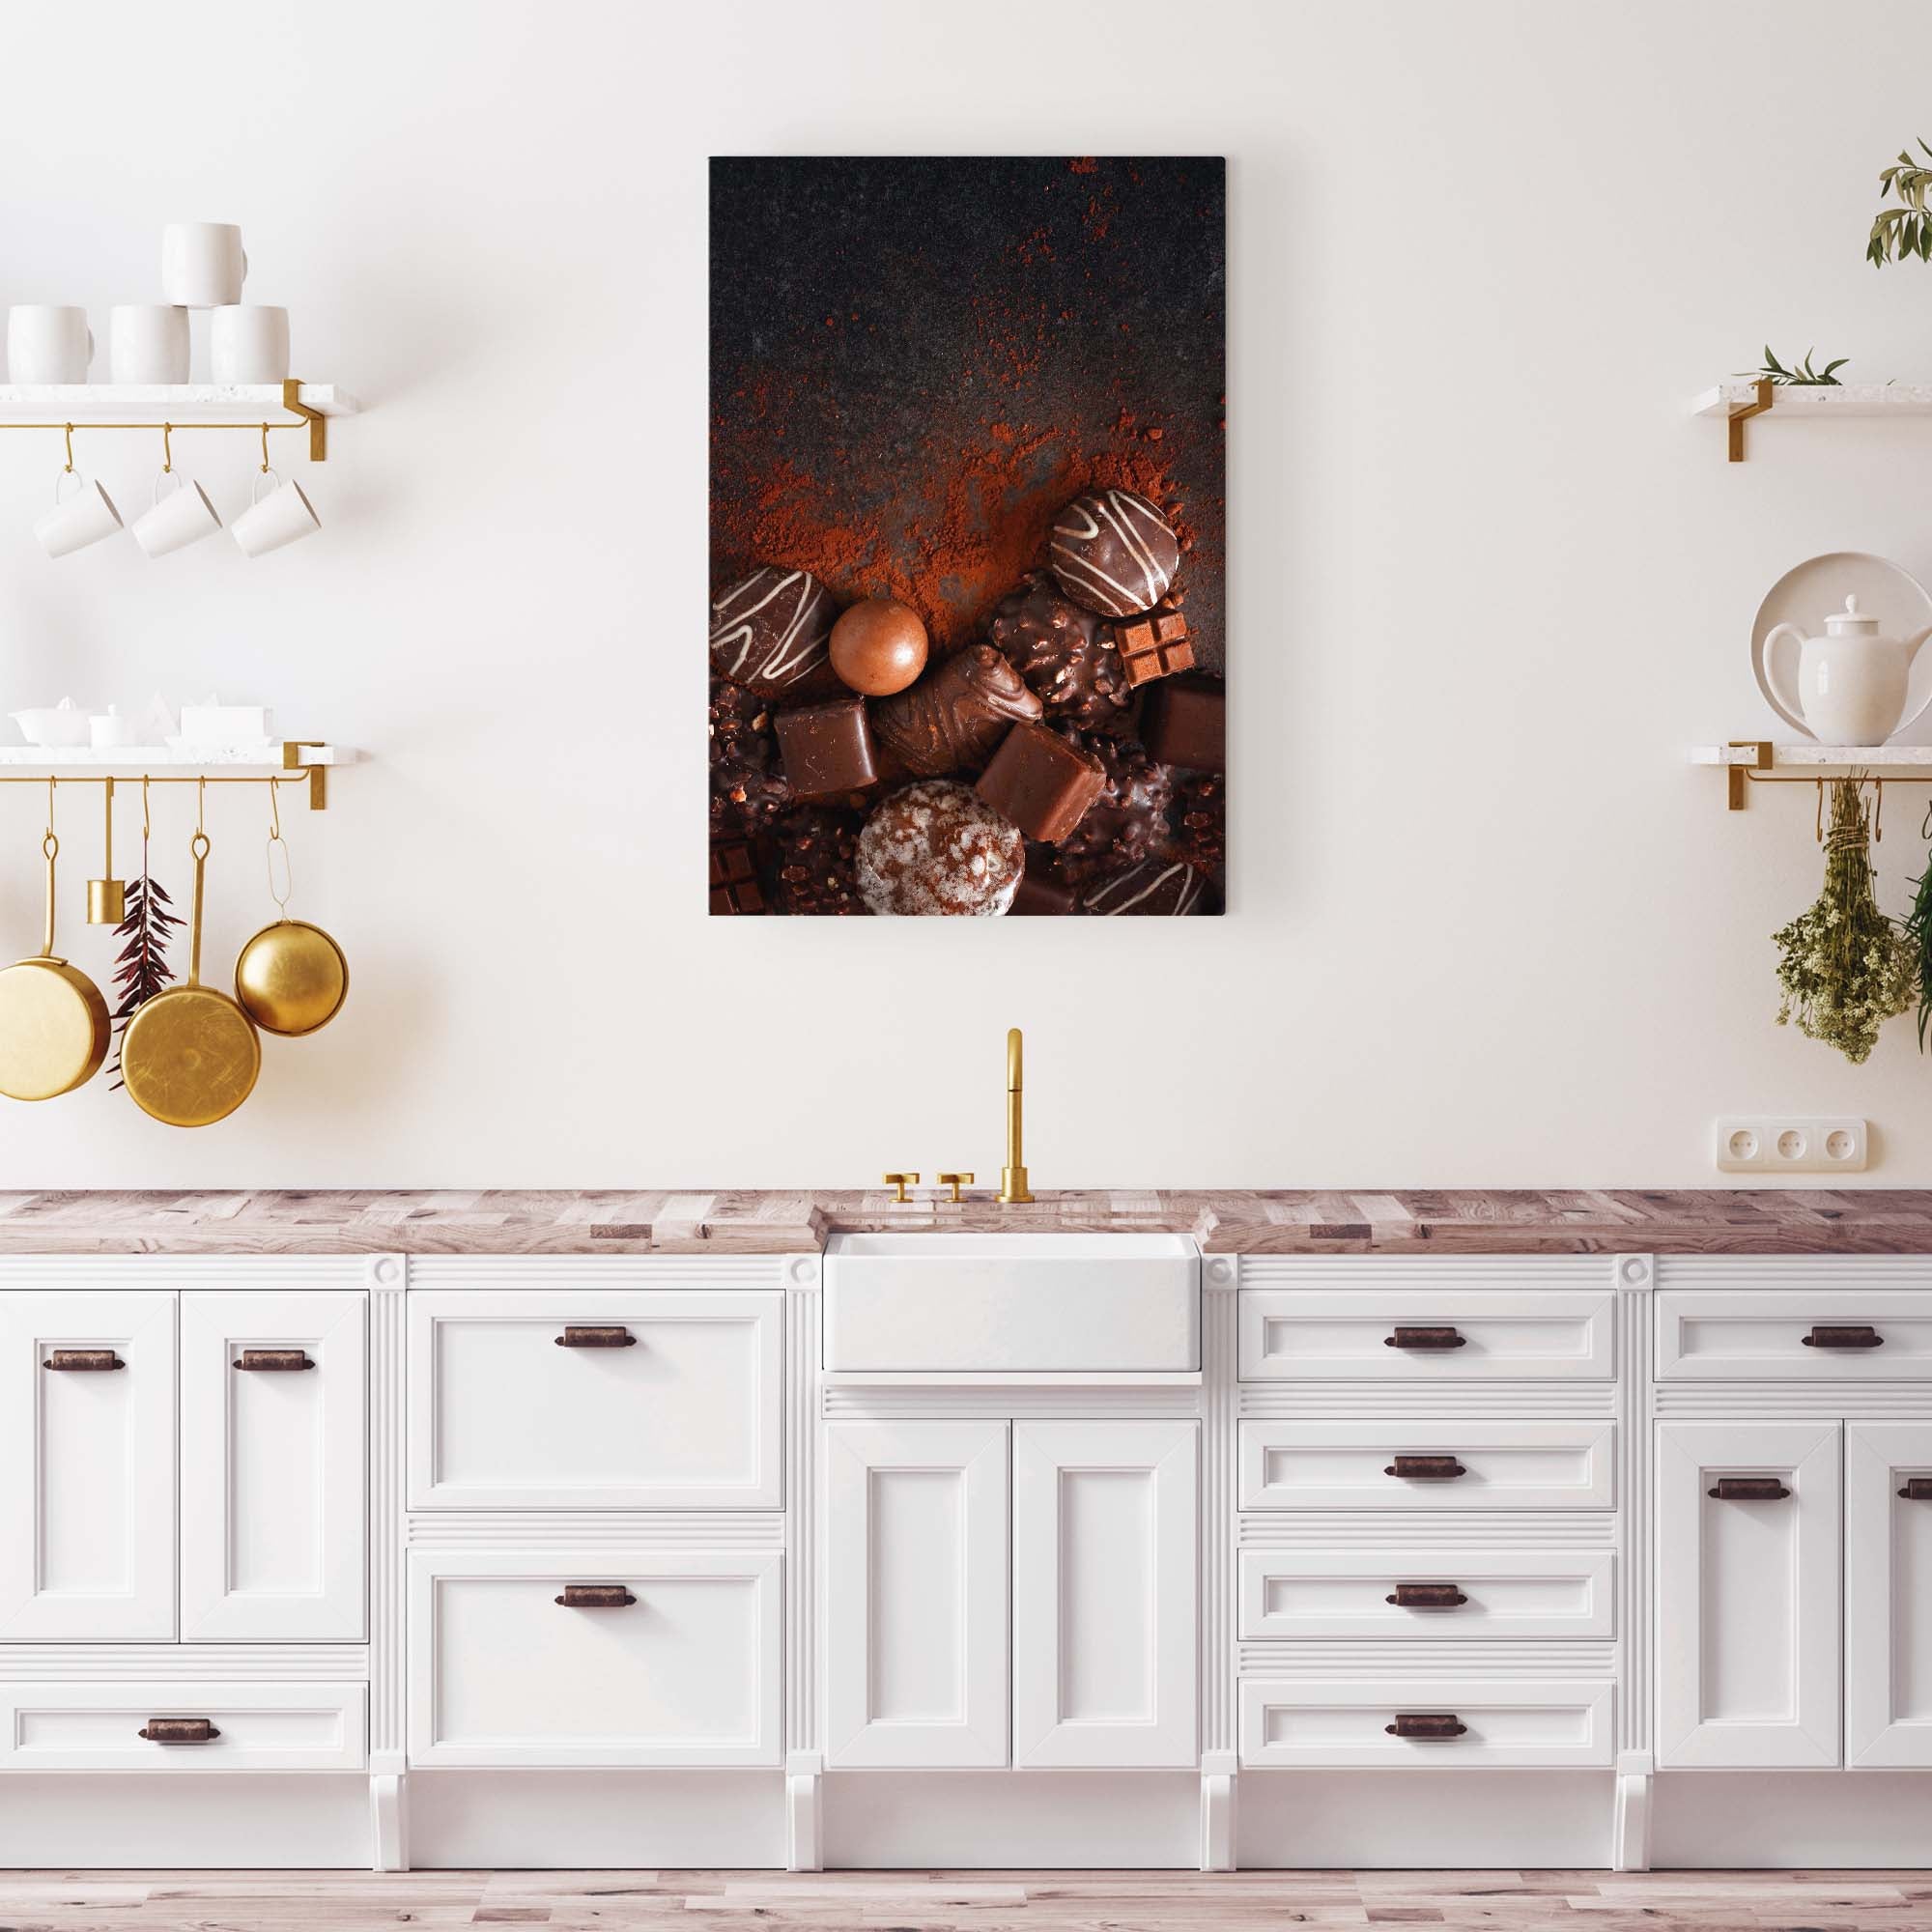 Studio One Canvas Wall Decor Prints - Couture Cravings ( Food & Drink > Food > Sweets & Desserts > Chocolates art) - 40x26 in